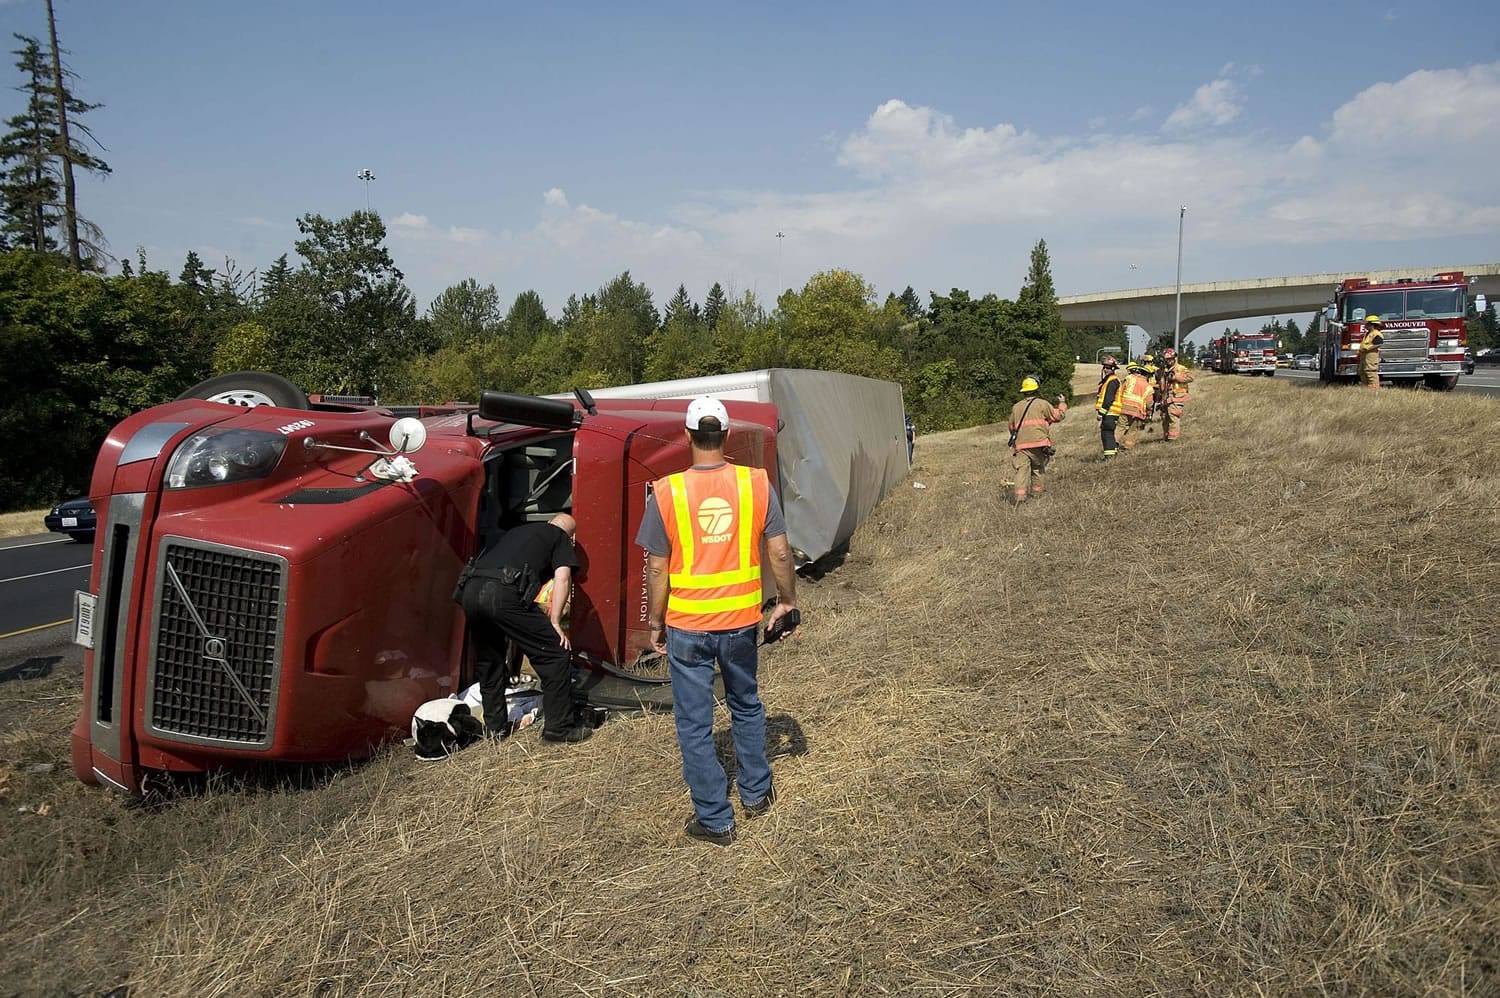 This semi-truck rolled as it exited SR 14 eastbound to I-205 southbound about 11:45 a.m.